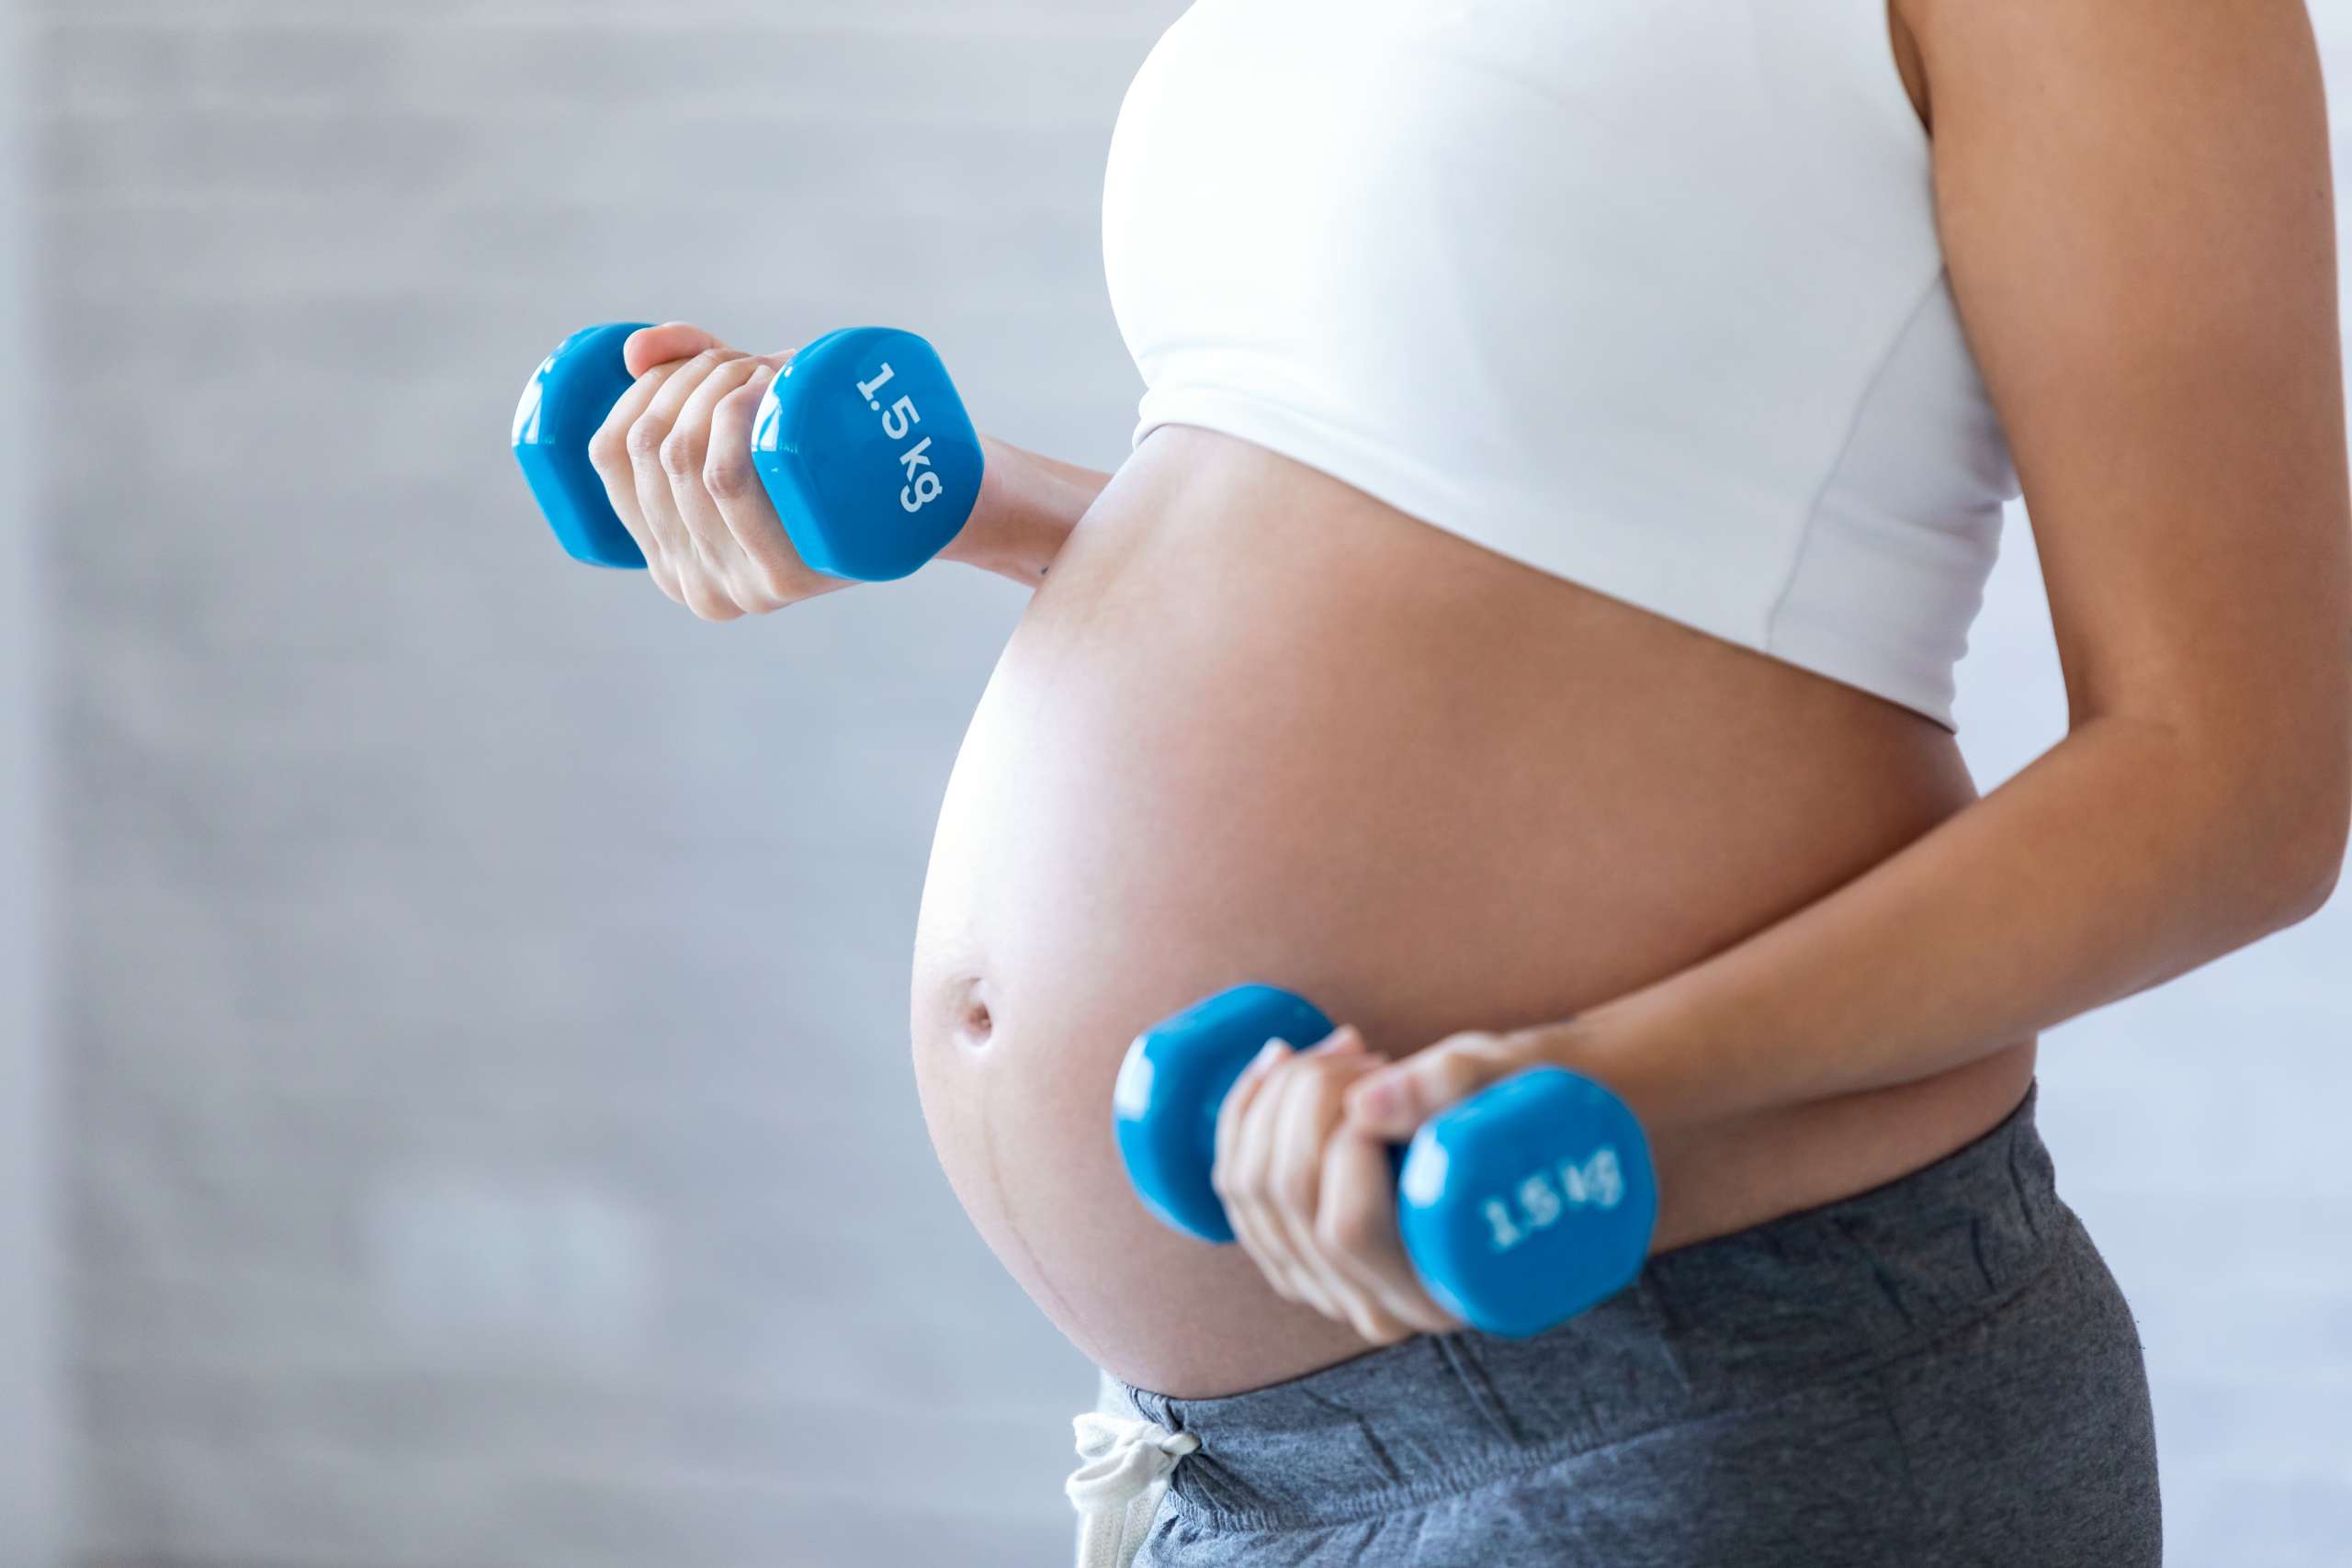 Pregnant woman doing exercise with dumbbells at home.